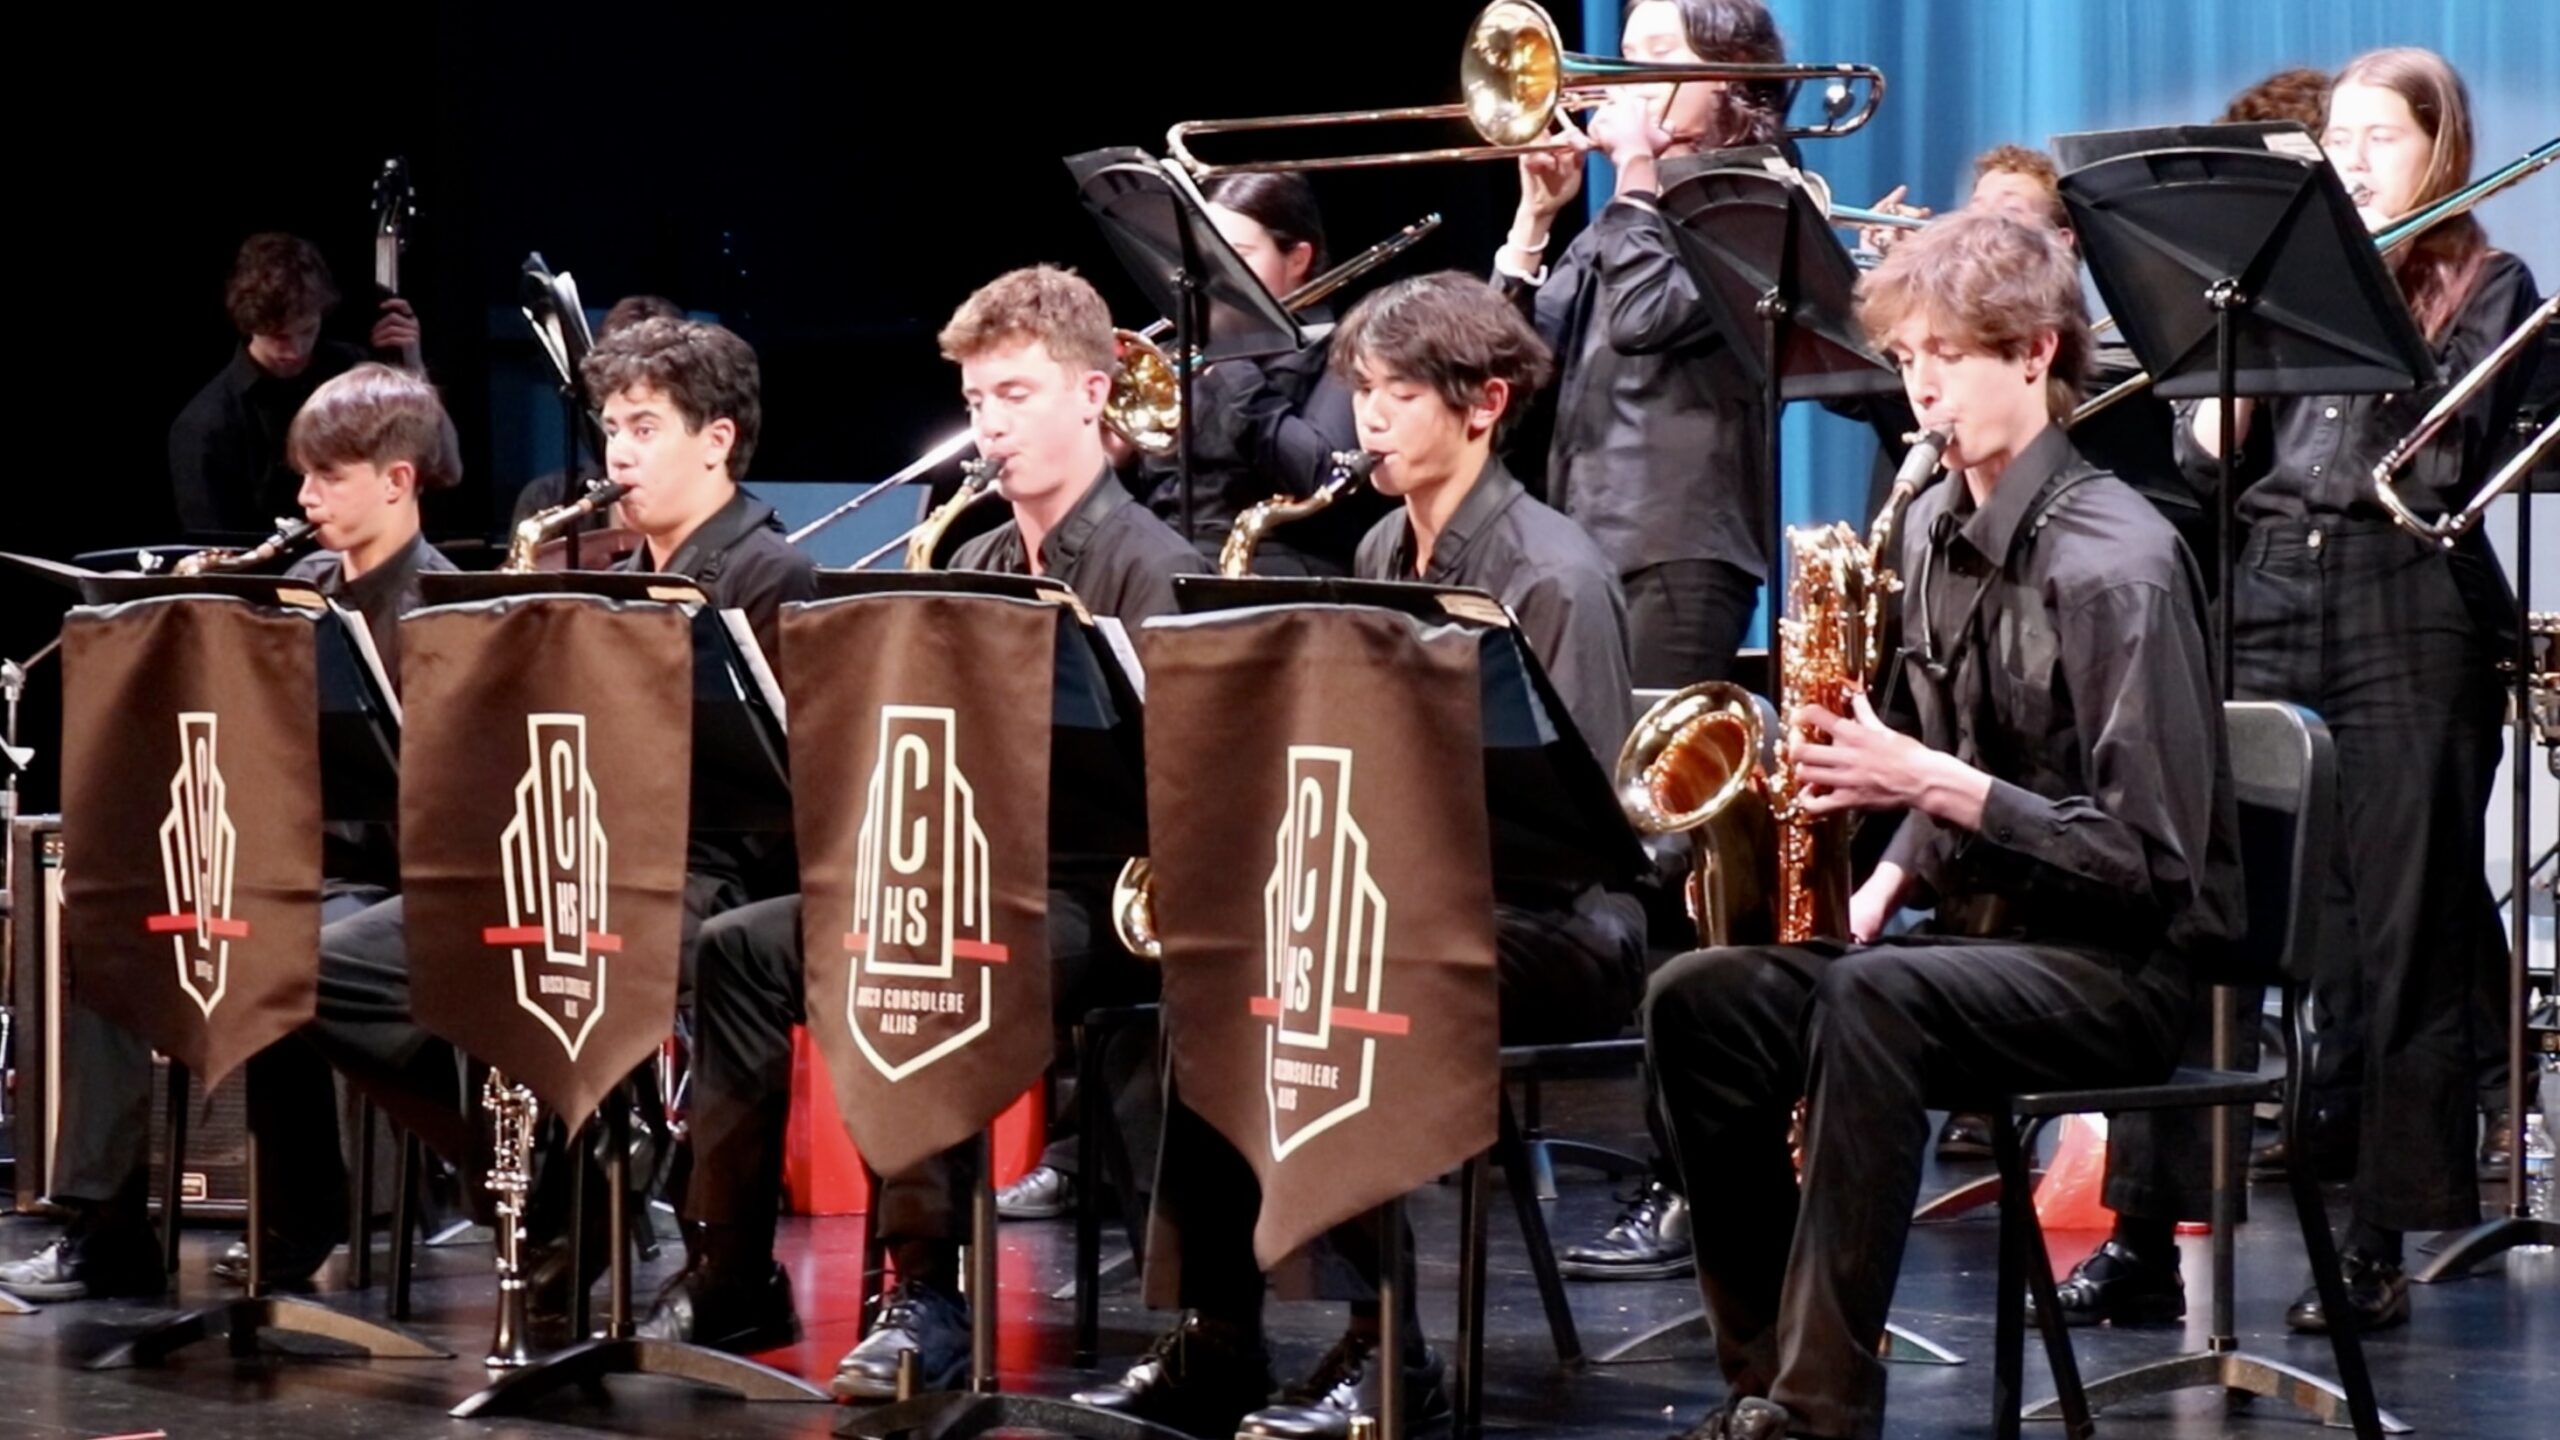 Students playing saxophones